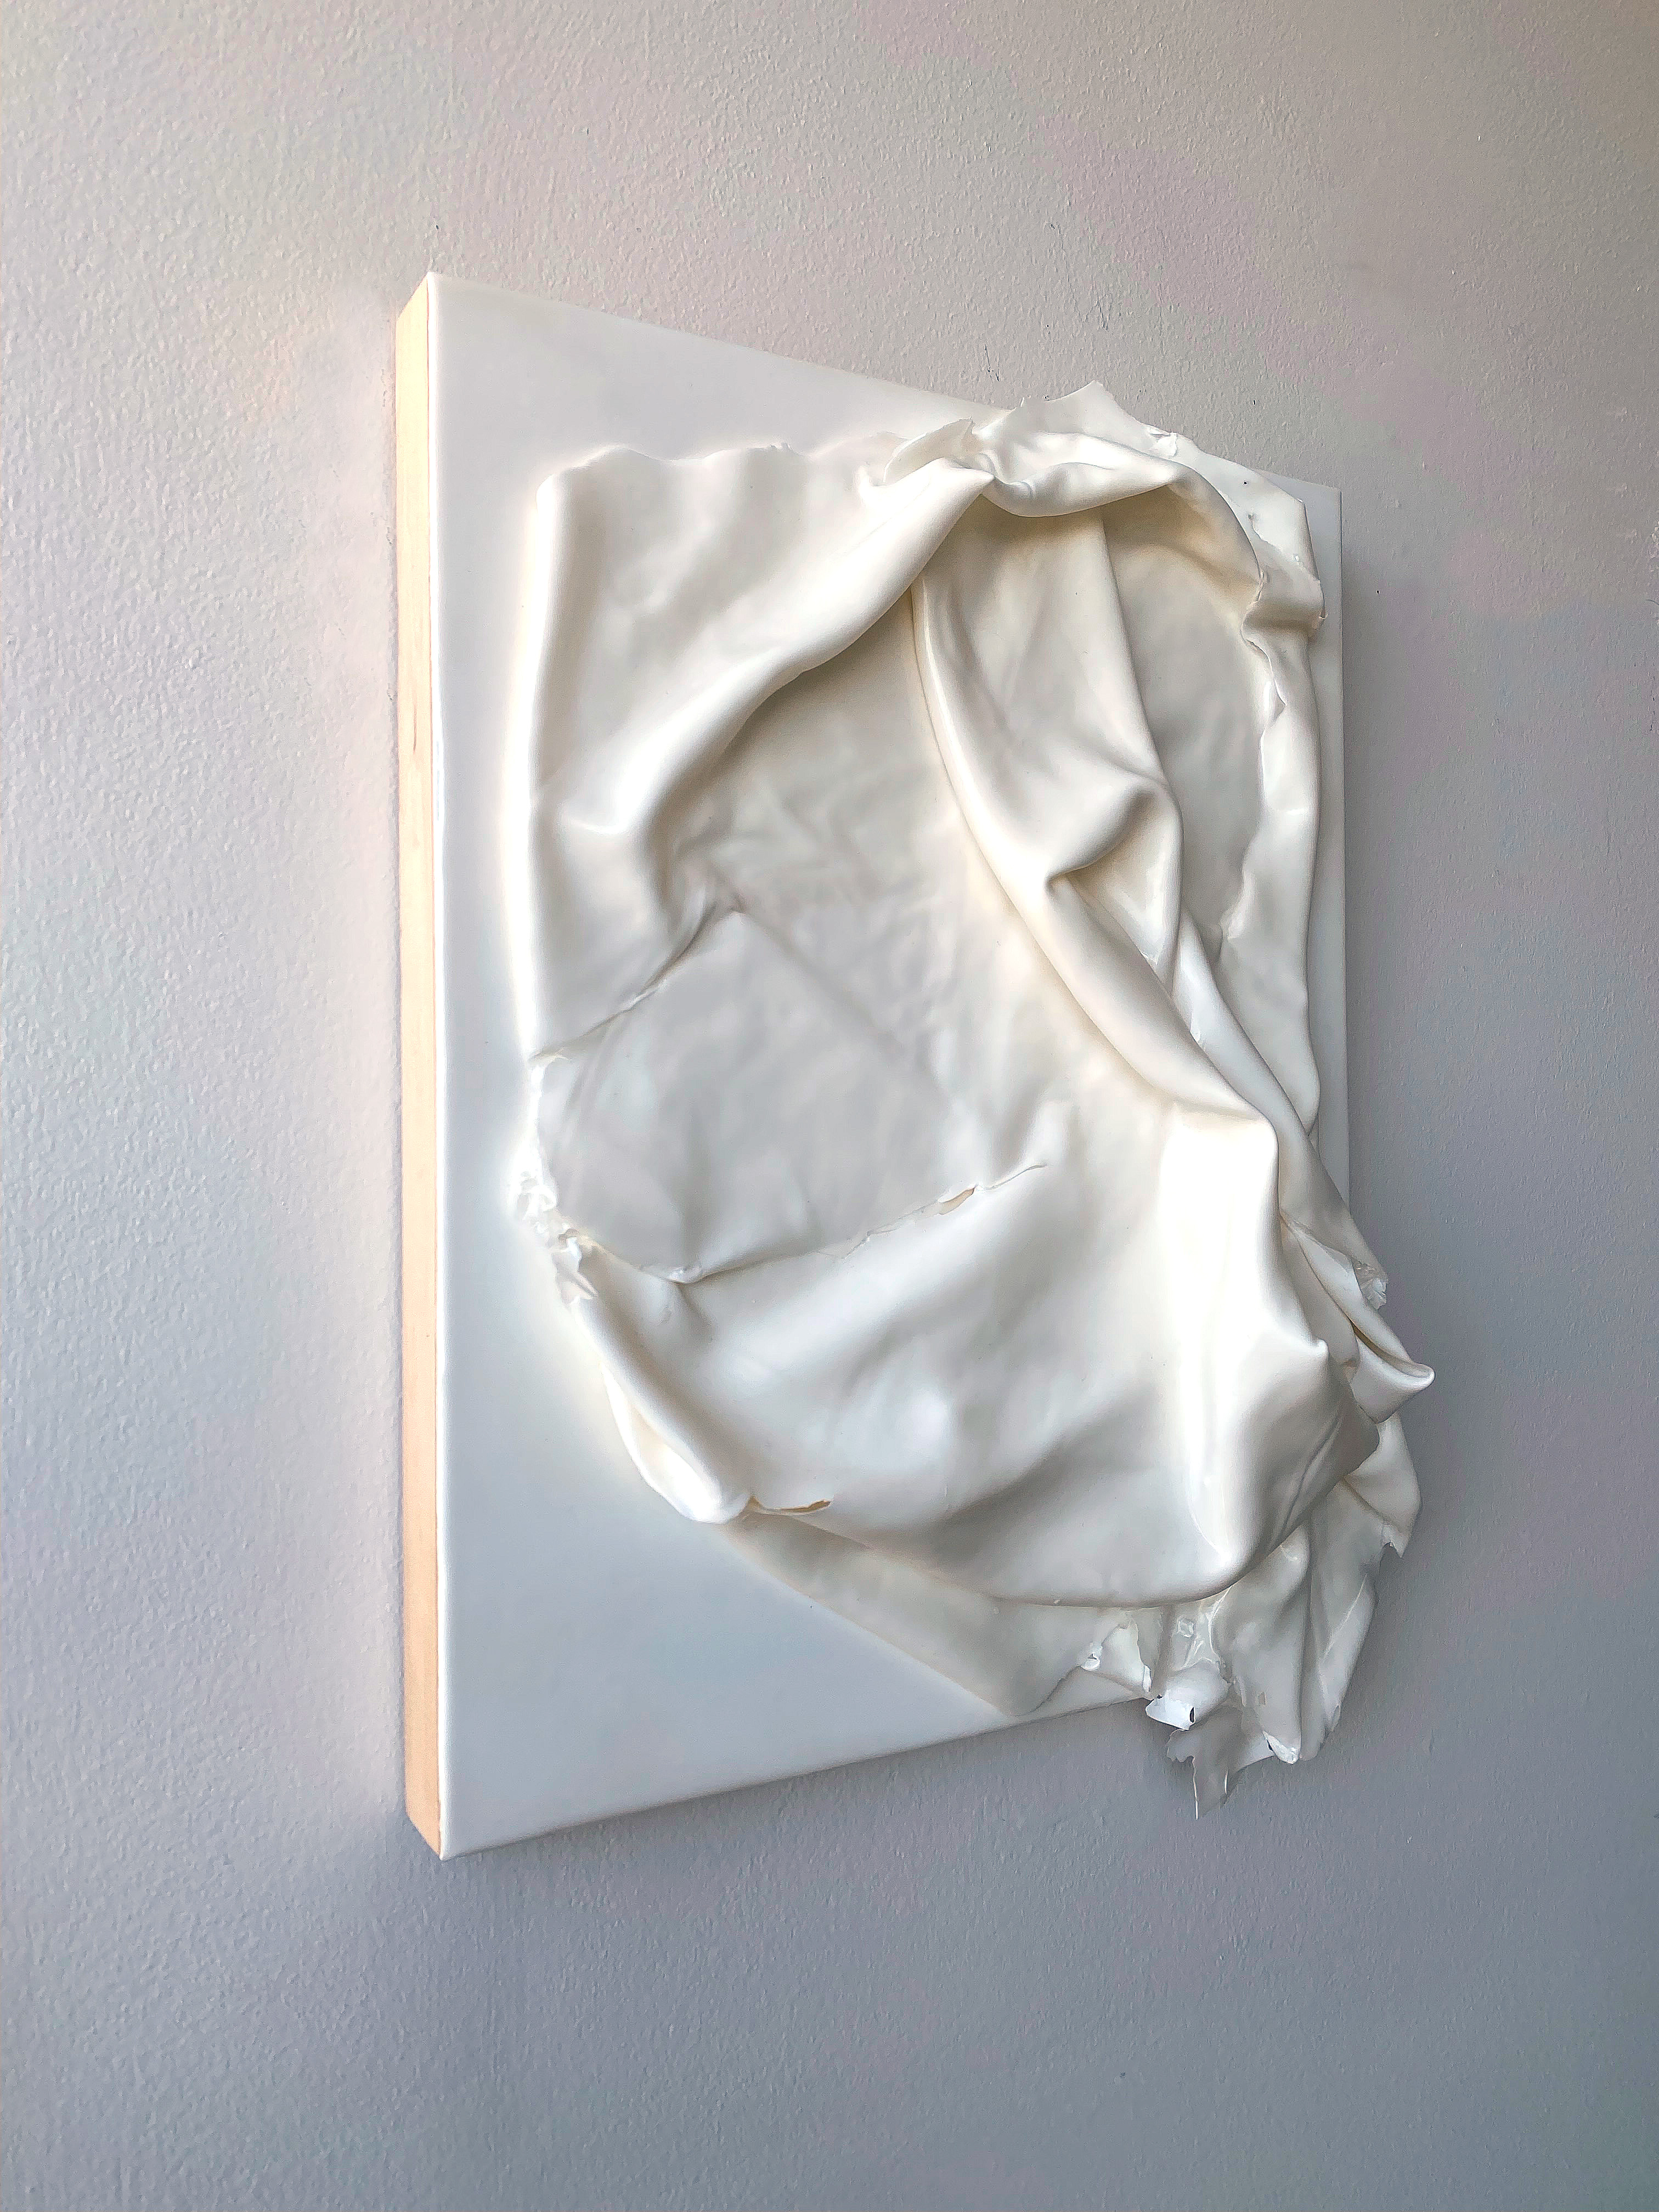 Image of Contemporary art piece titled Veiling by Norah Borden  